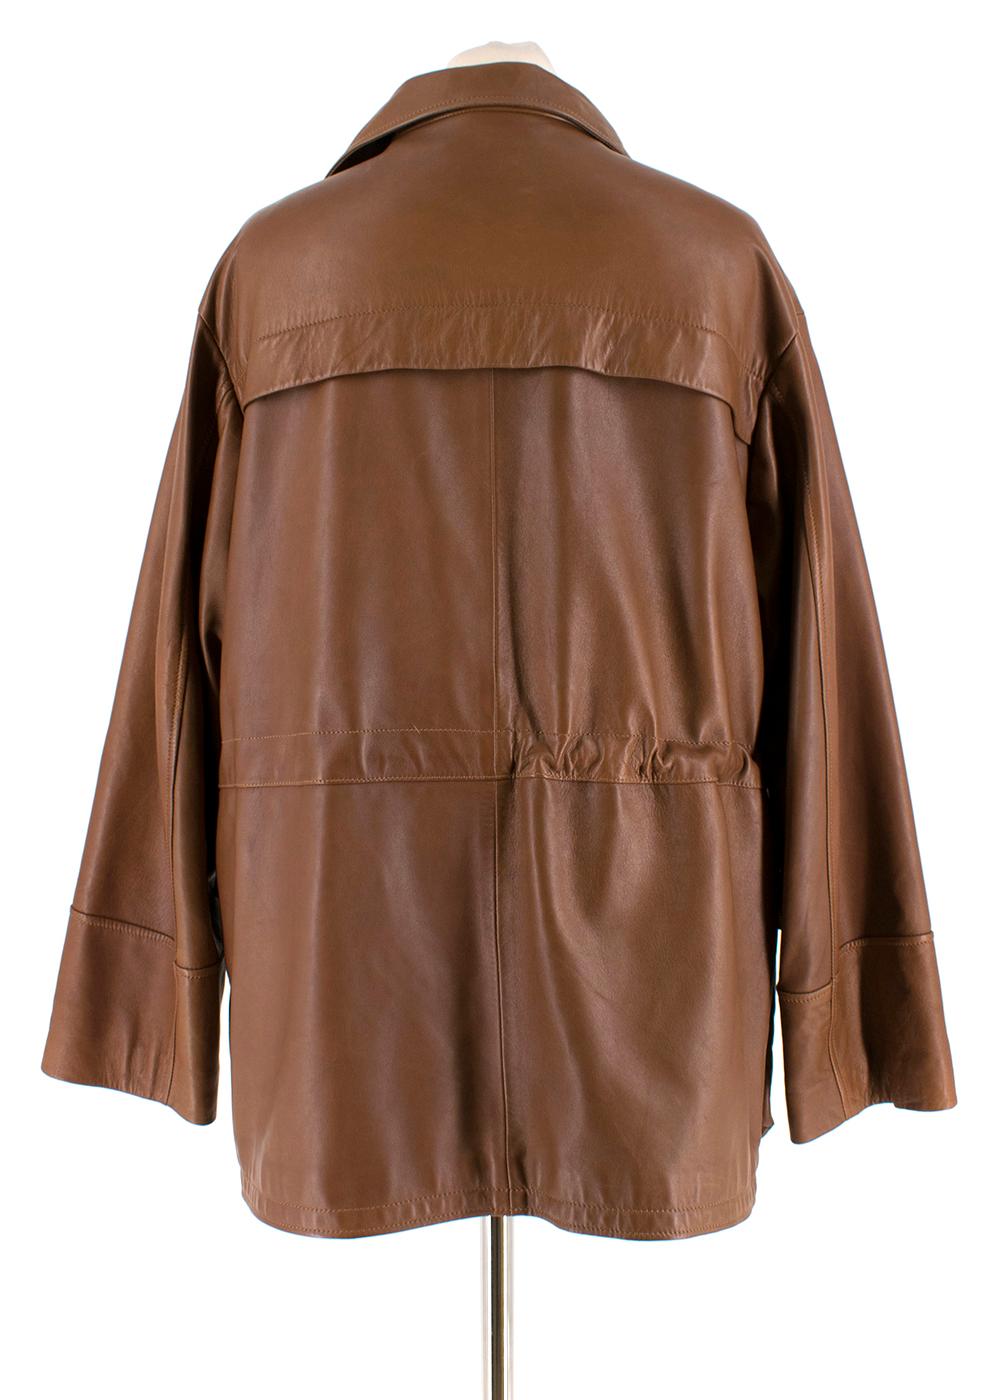 JW Anderson Brown Soft Leather Drawstring Waist Jacket - Size S In Excellent Condition For Sale In London, GB